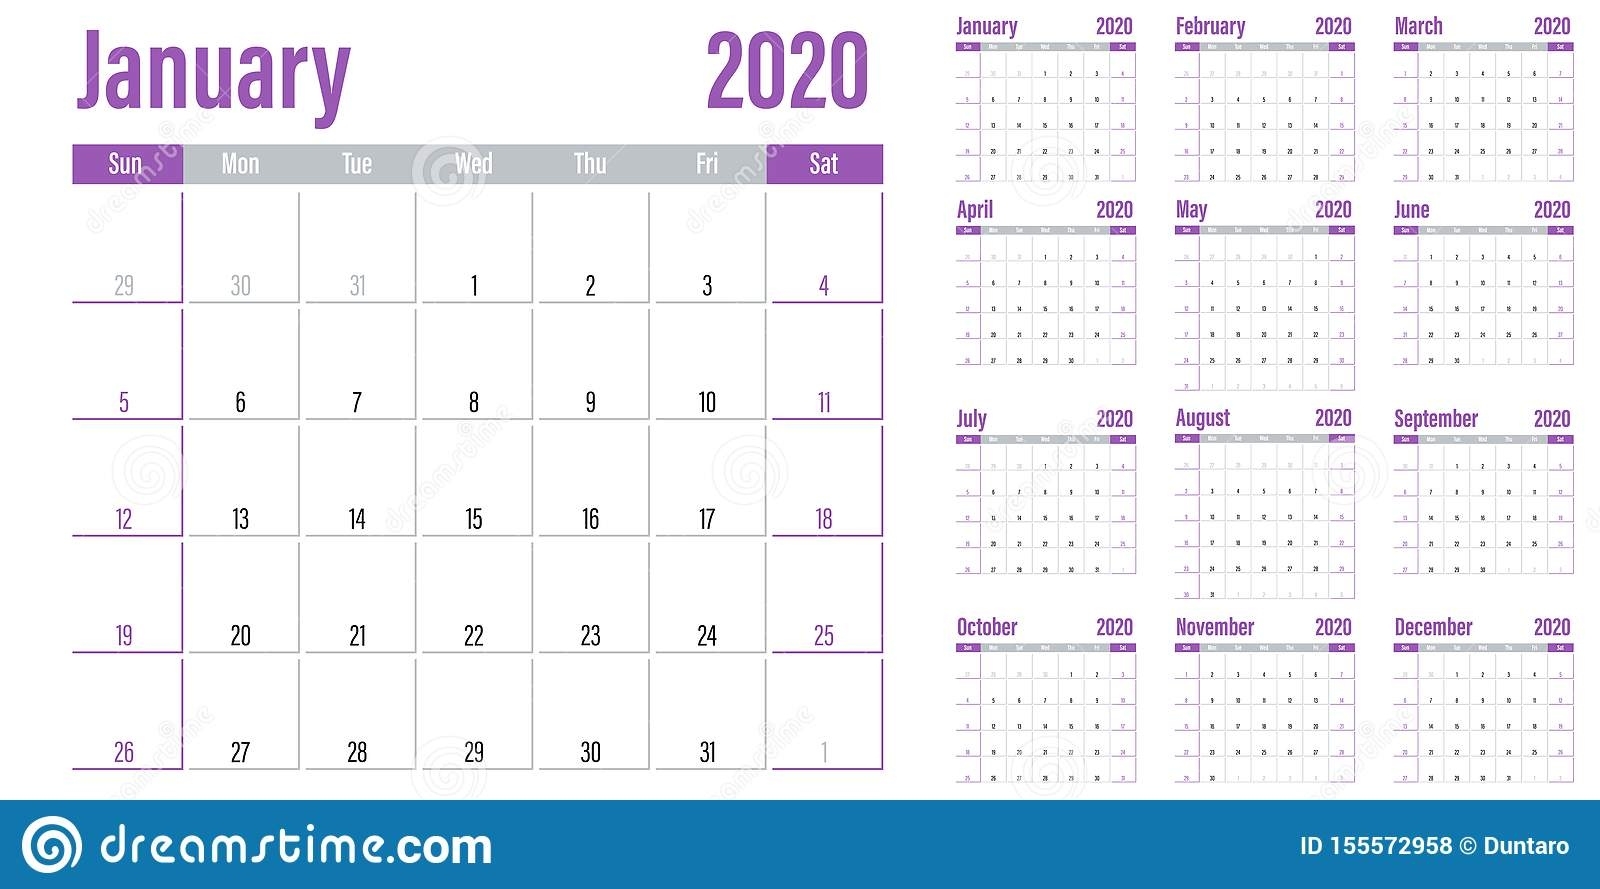 Calendar Planner 2020 Template Vector Illustration Stock Exceptional Calendar Of 2020 Indicating Week Numbers